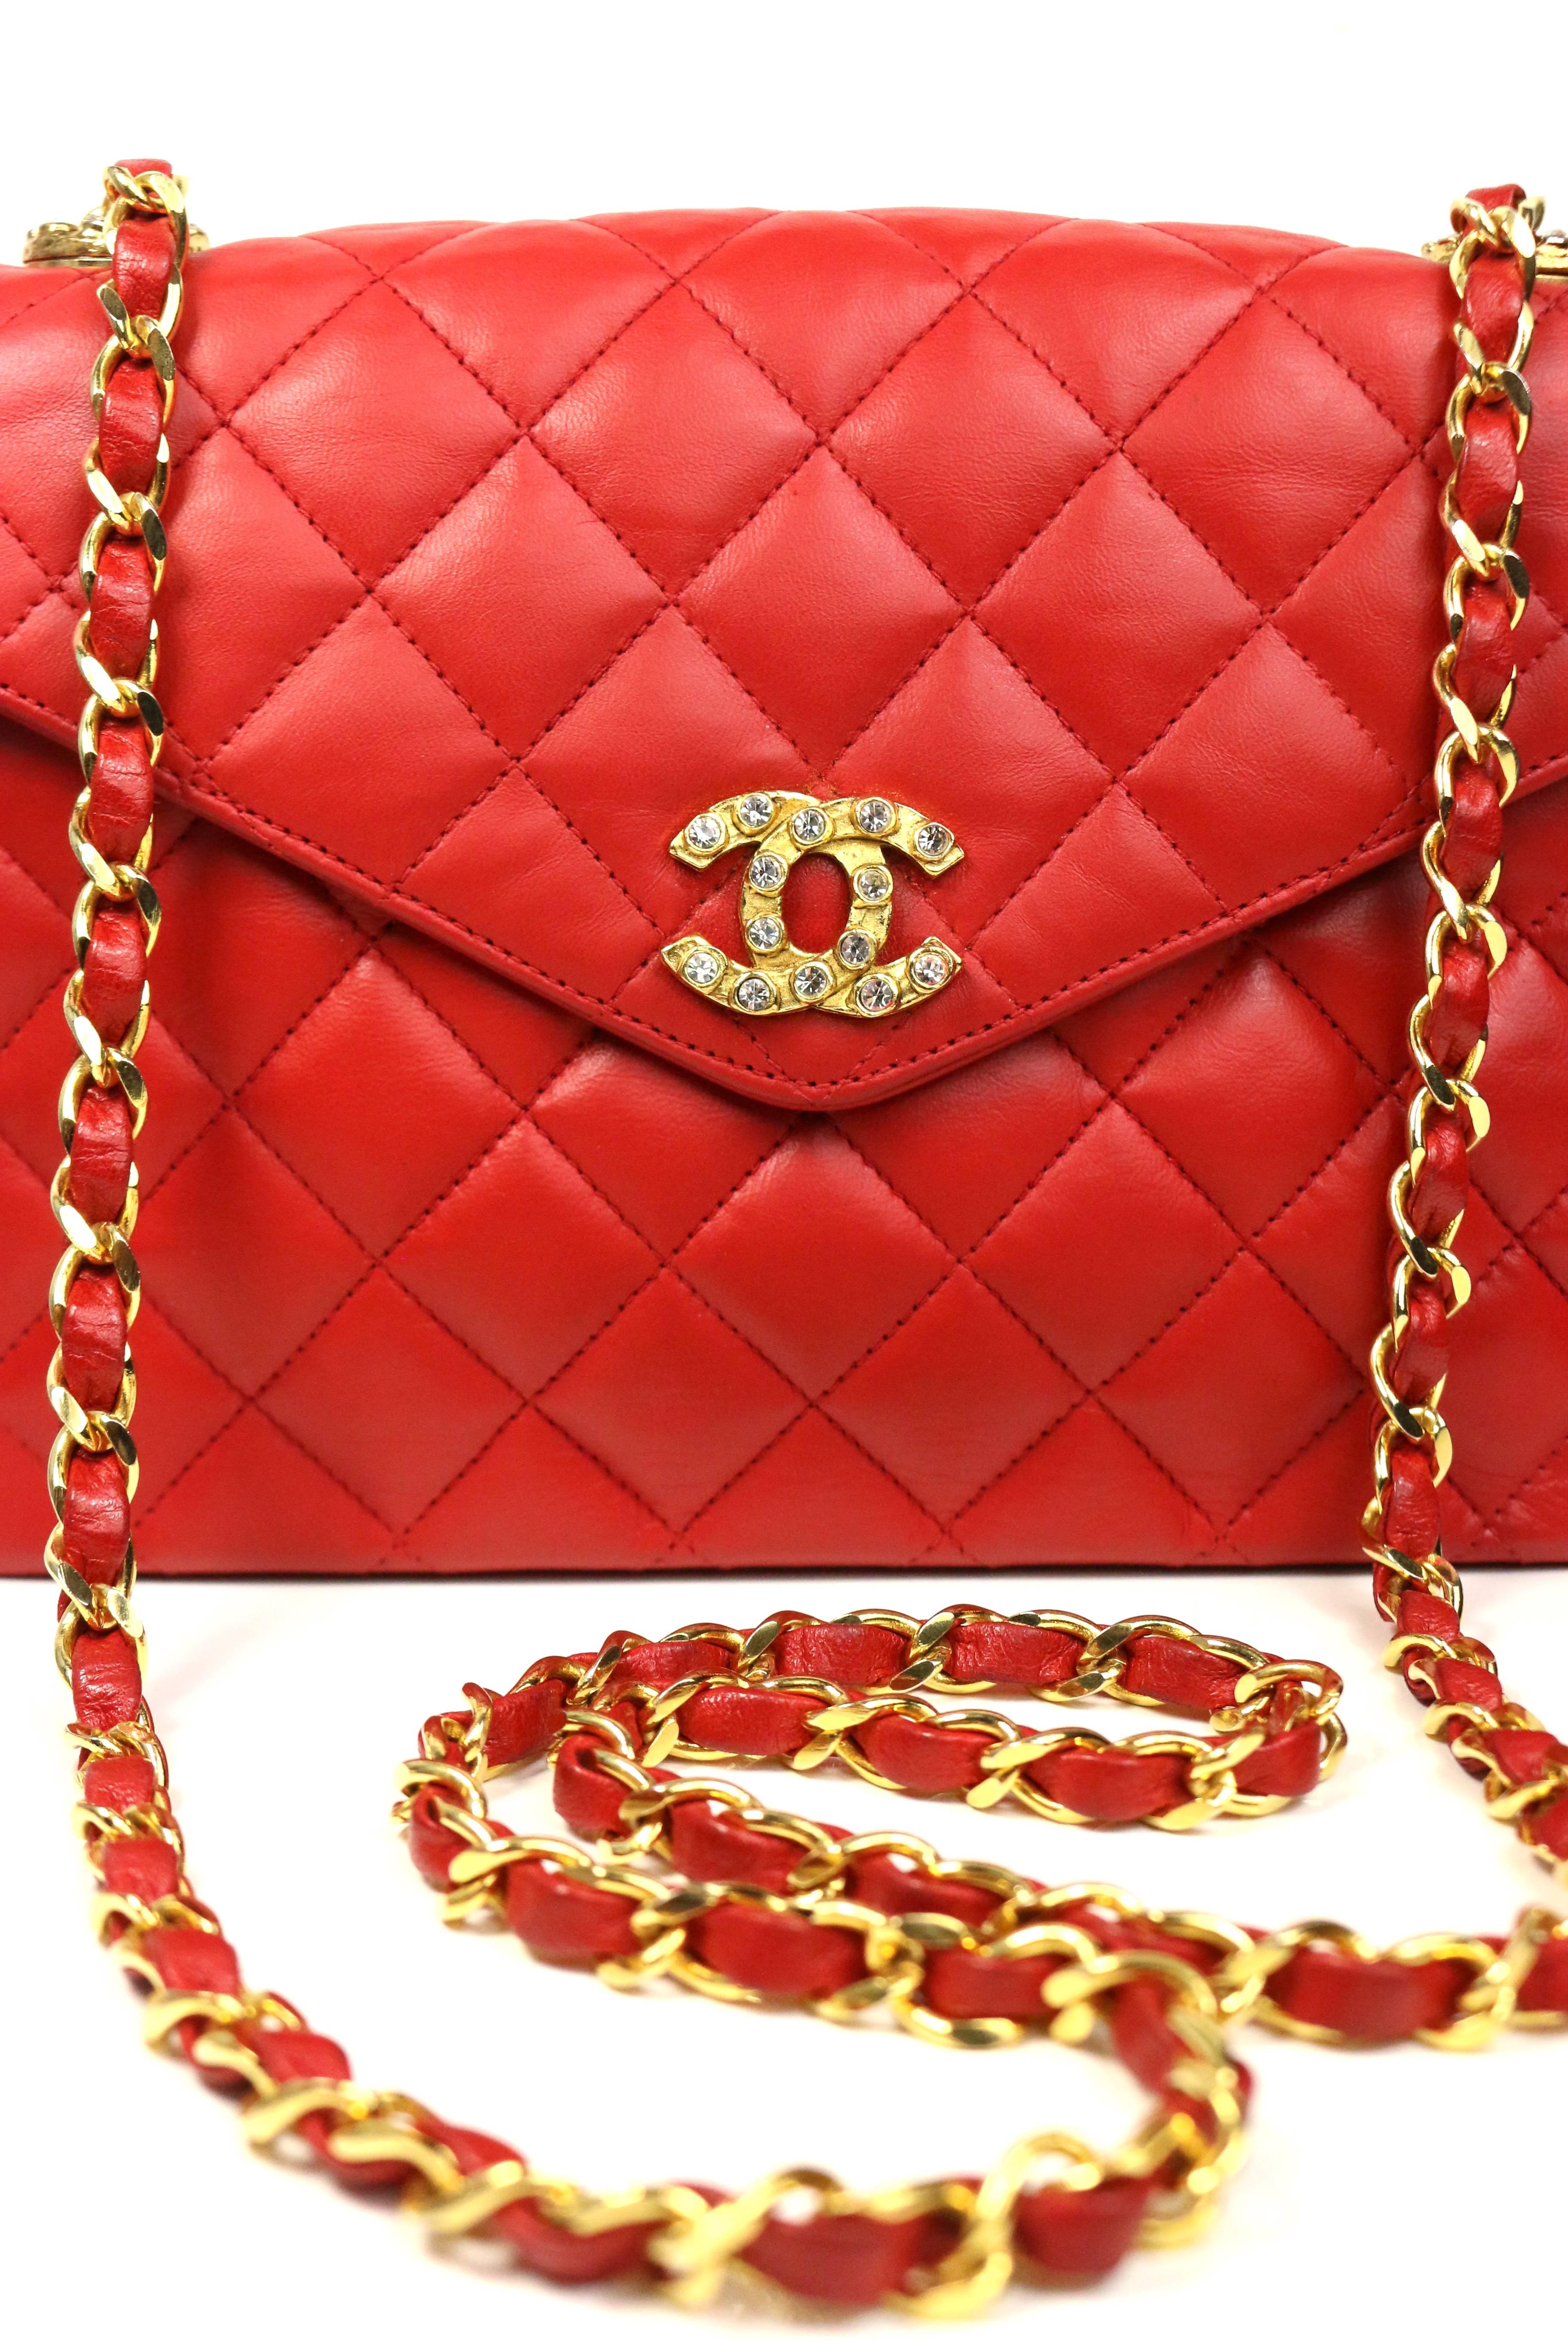 - Vintage 80s Chanel classic red quilted lambskin leather flap shoulder bag. Featuring gold toned 